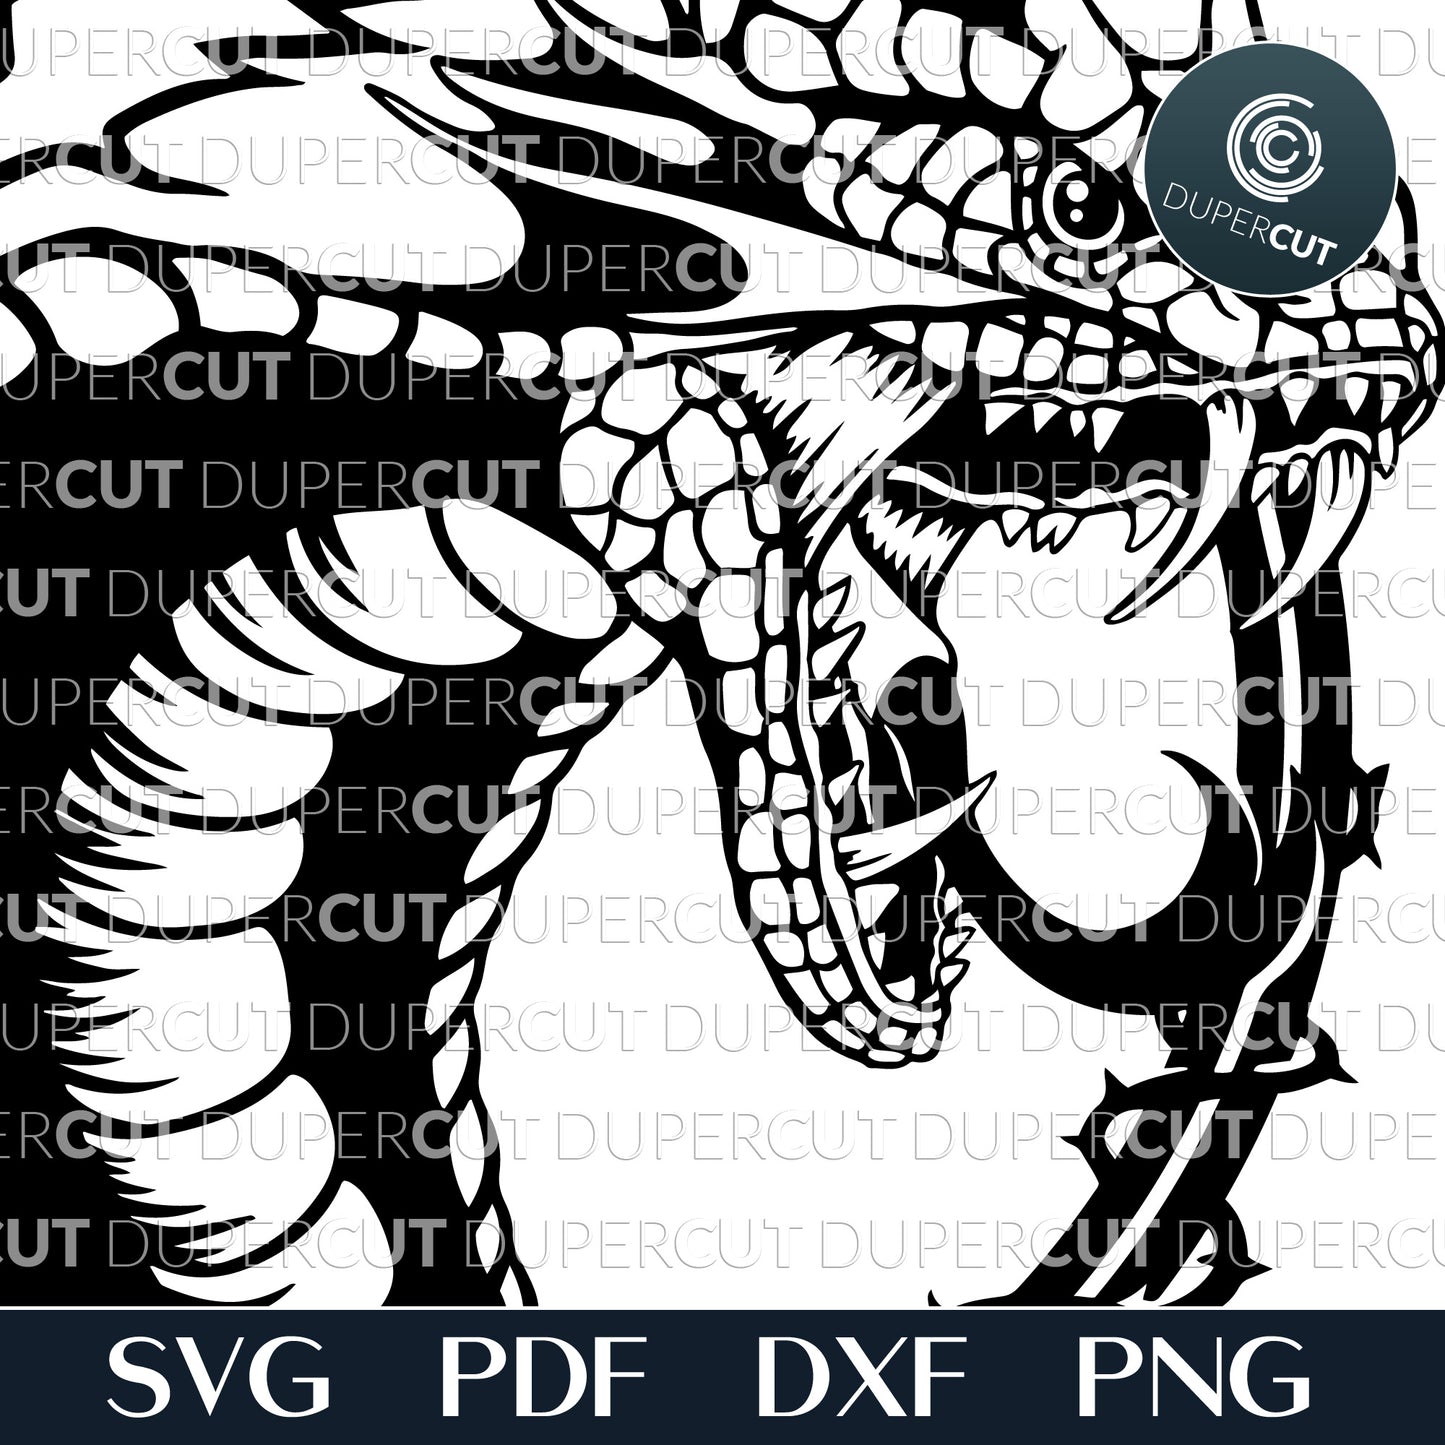 Roaring dragon snake - steampunk tattoo design - SVG PDF PNG vector files for paper cutting, laser machines, Cricut, Silhouette Cameo, Glowforge